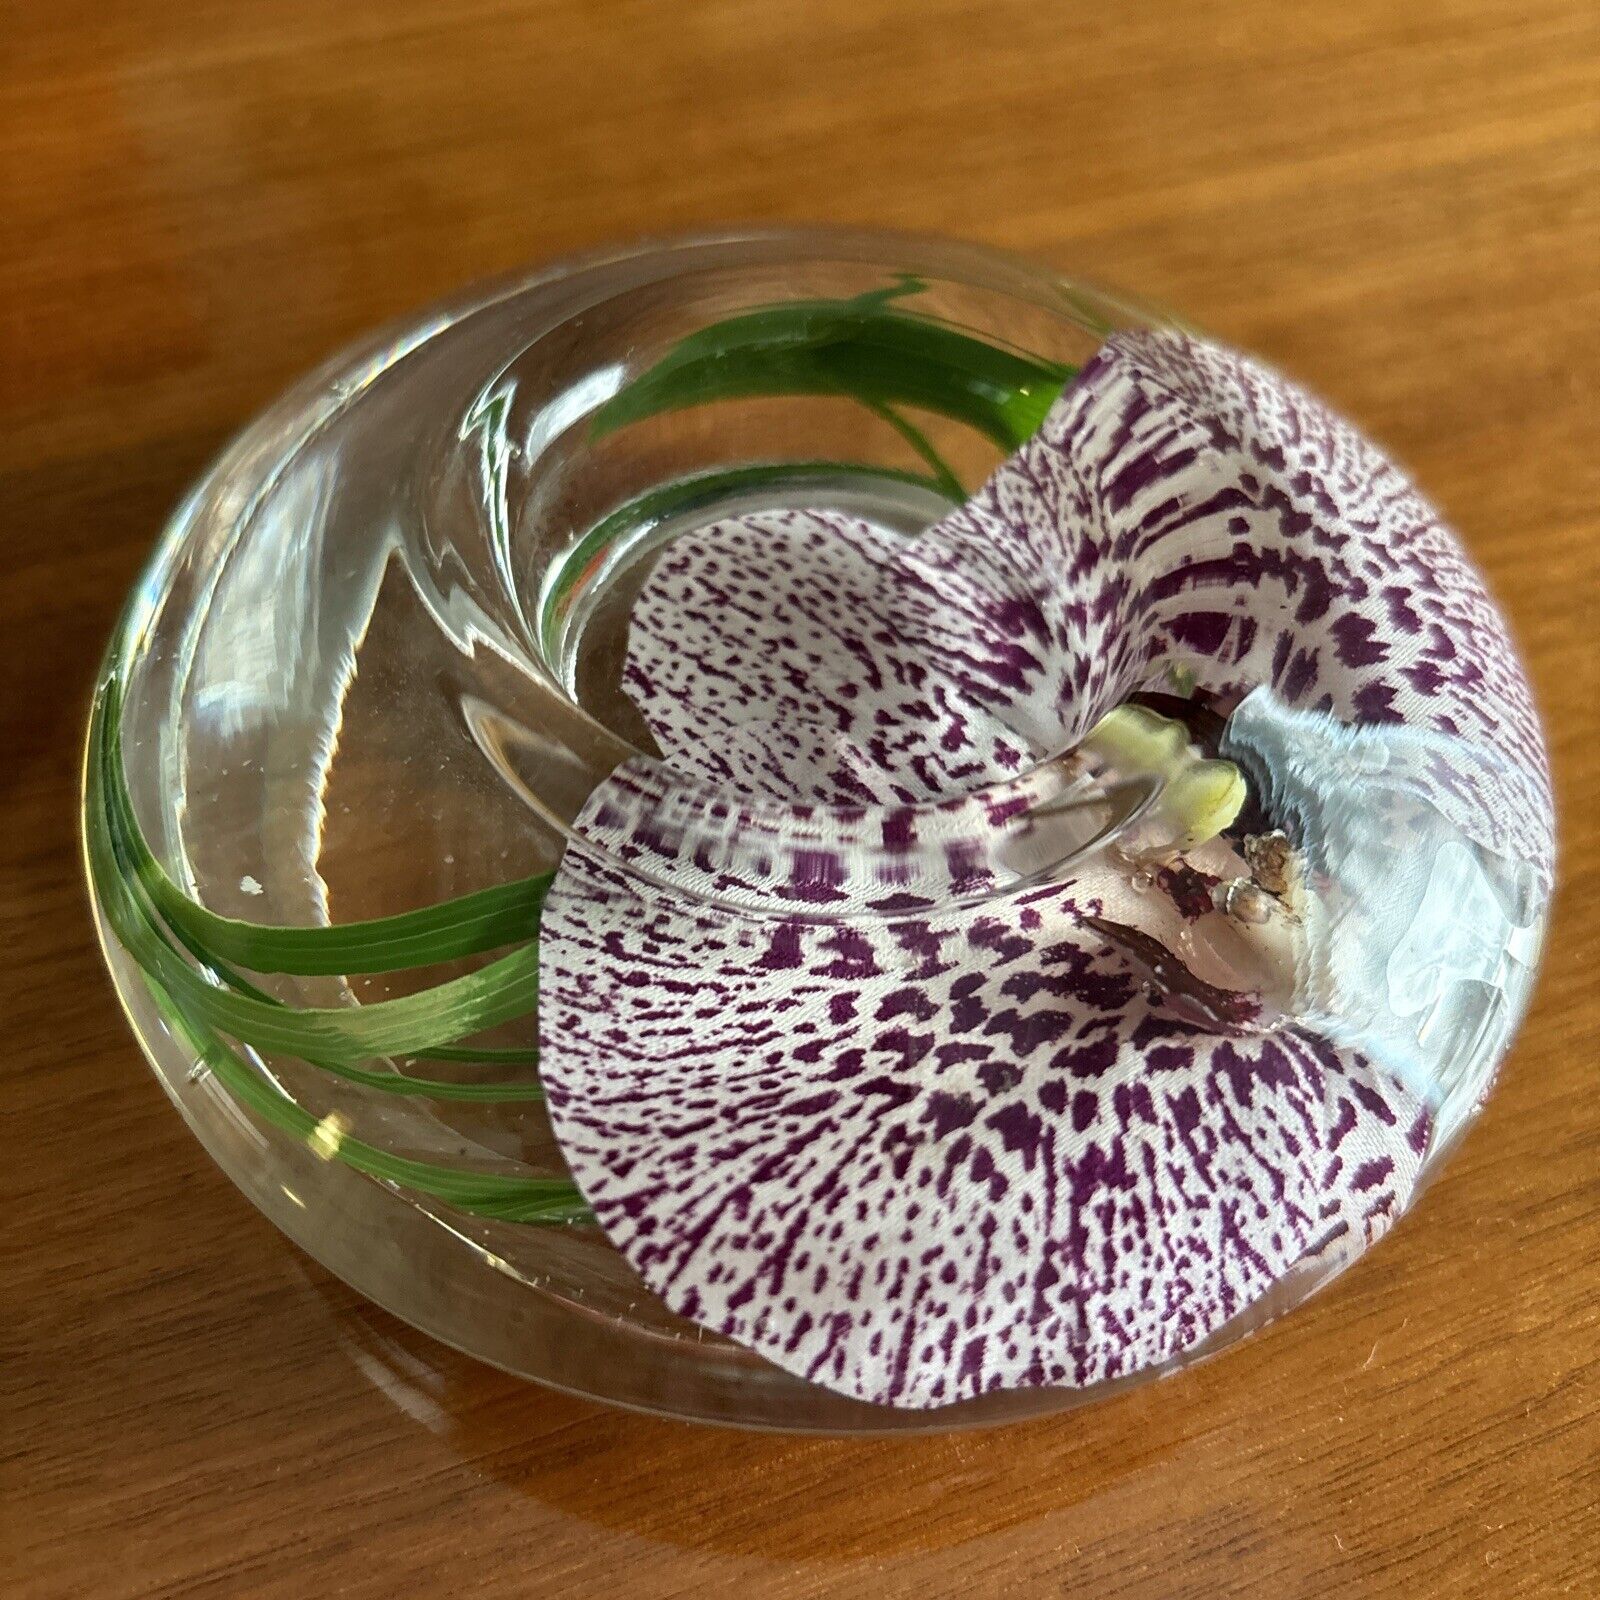 Emilio Robba Spotted Orchid Inside Clear Votive or Tealight Foil Sticker Affixed